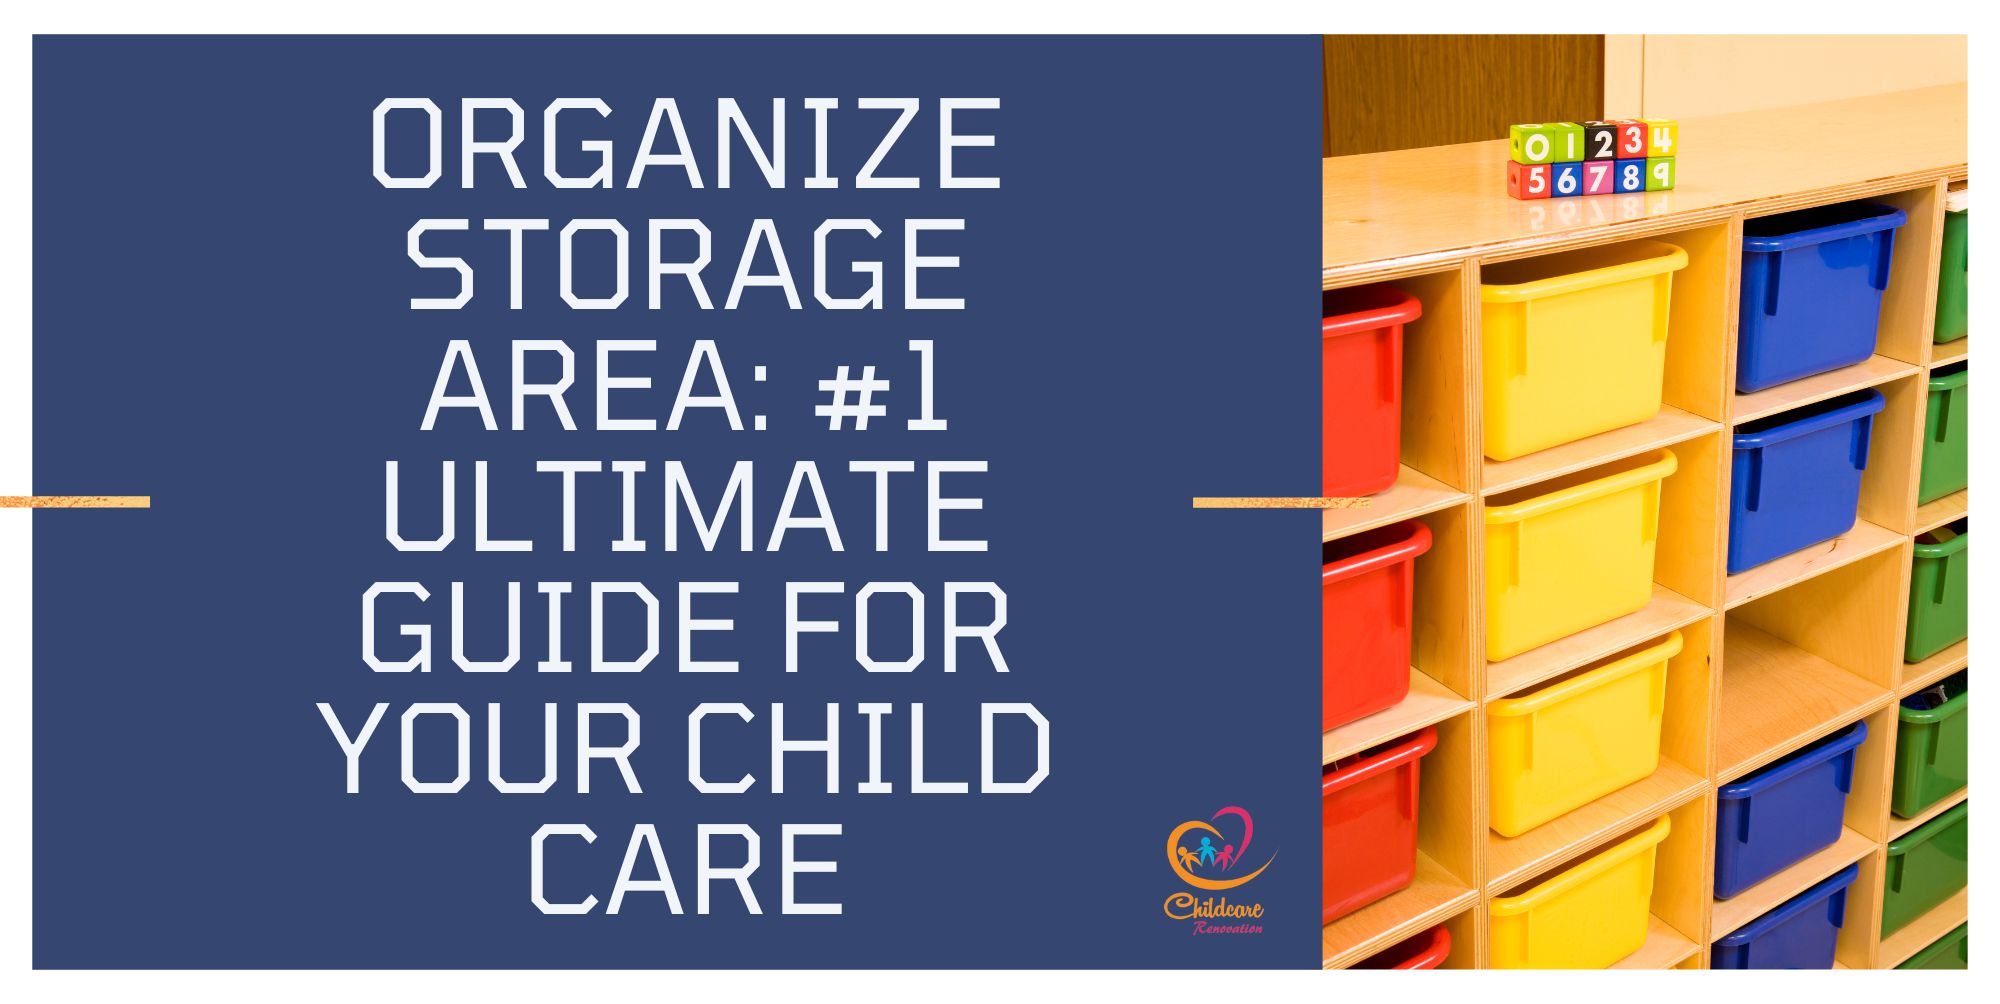 https://www.childcarerenovation.com/wp-content/uploads/2022/11/Organize-Storage-Area-1-Ultimate-Guide-For-Your-Child-Care.jpg